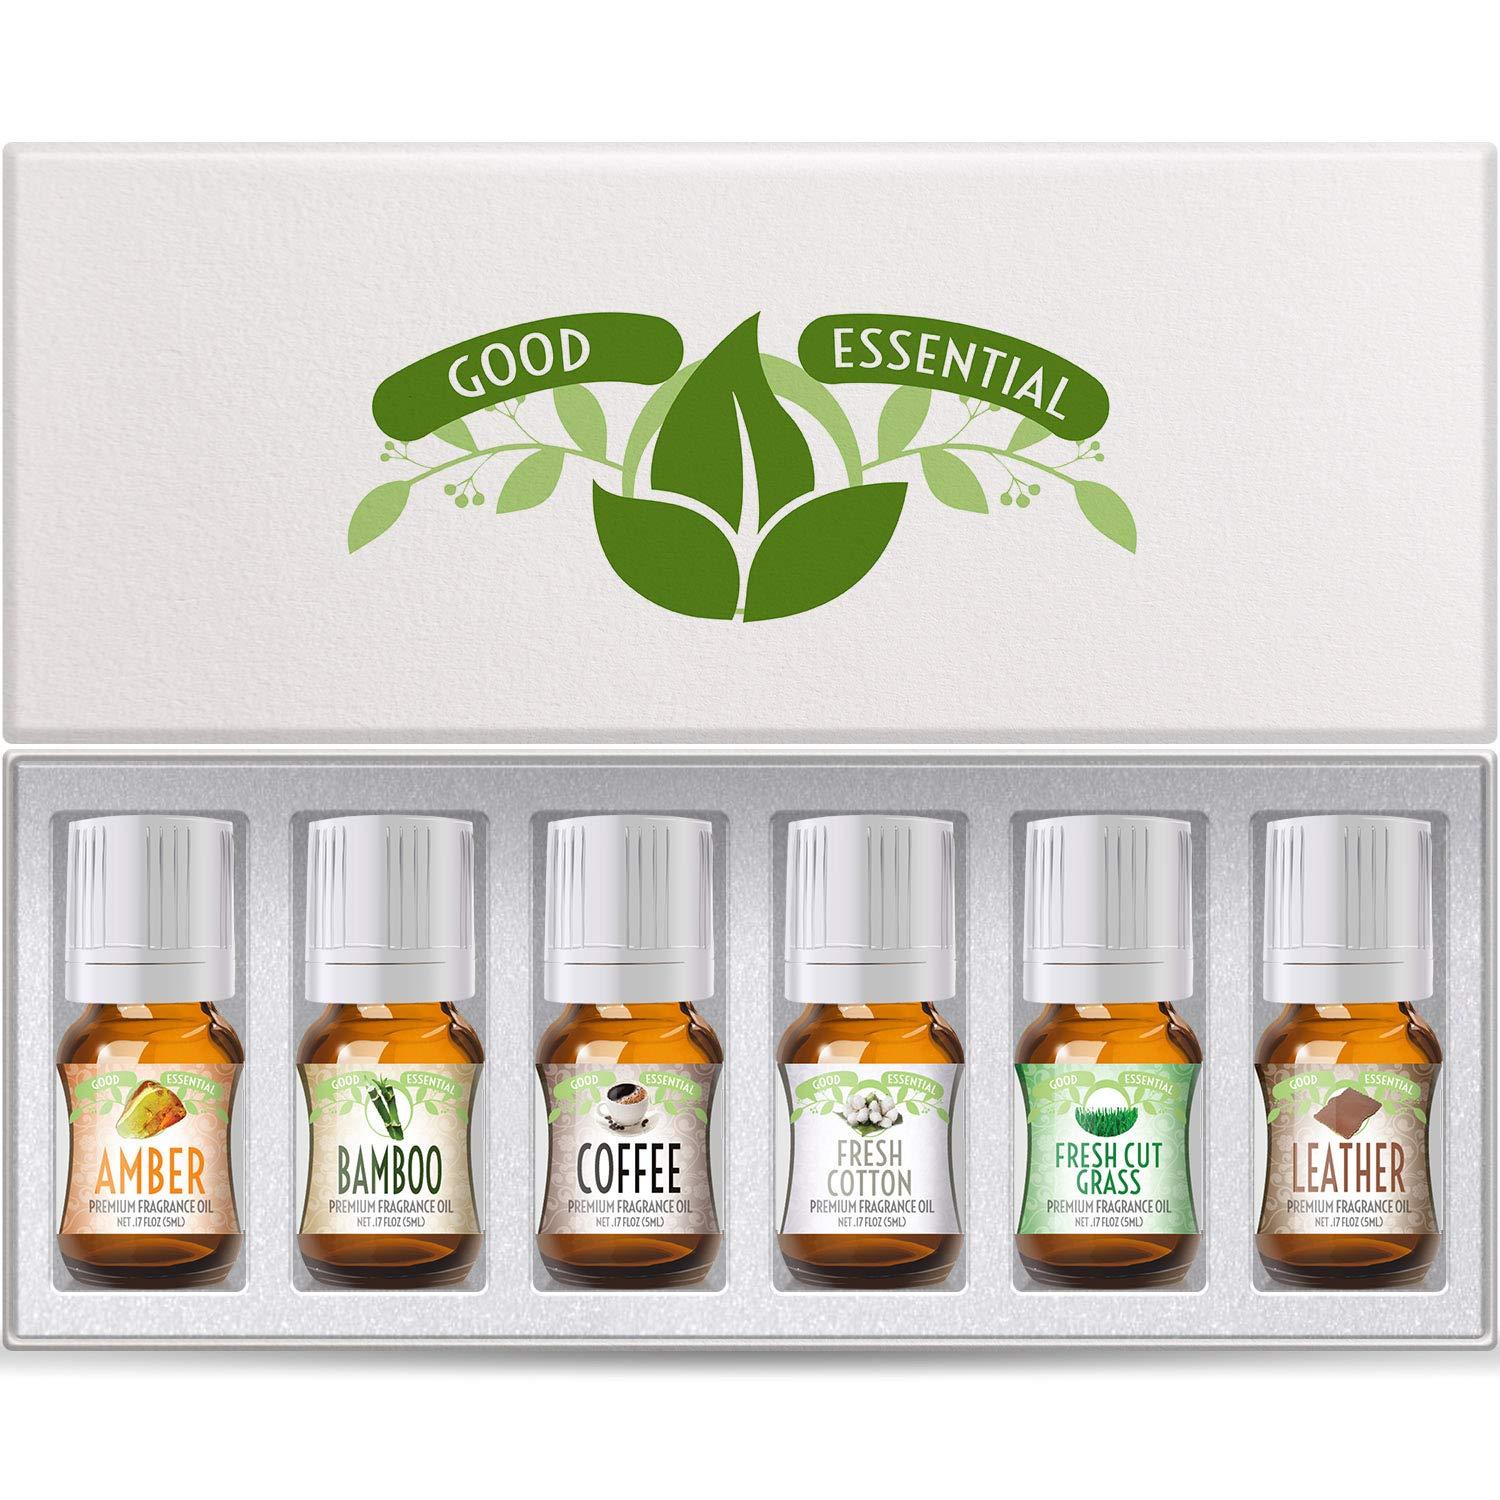 Fragrance Oils Set of 6 Scented Oils from Good Essential - Amber